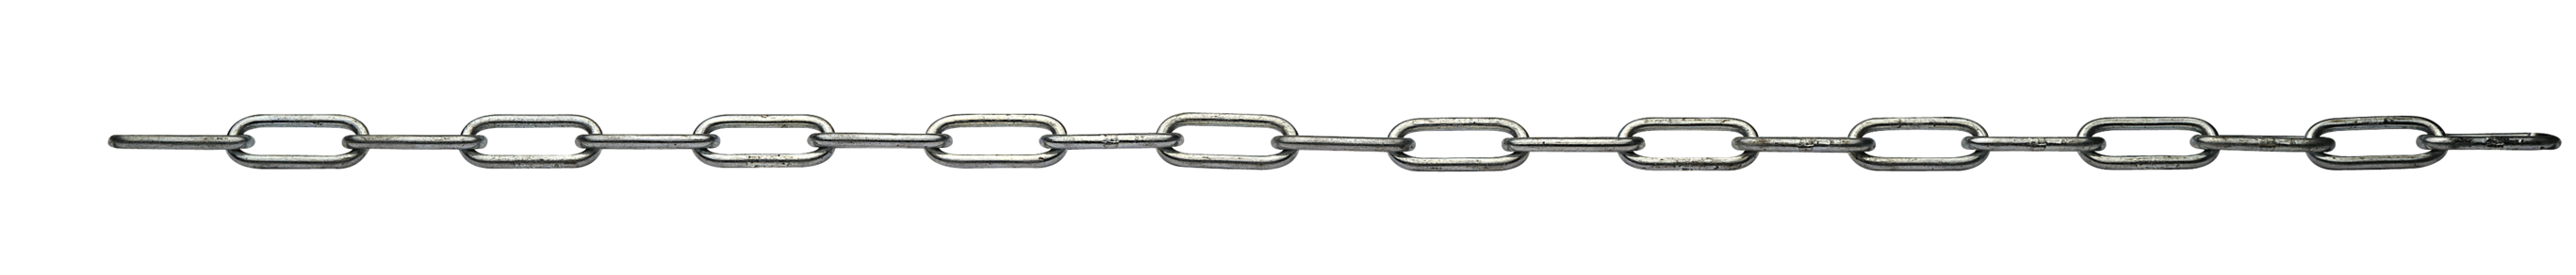 Chain File PNG Image